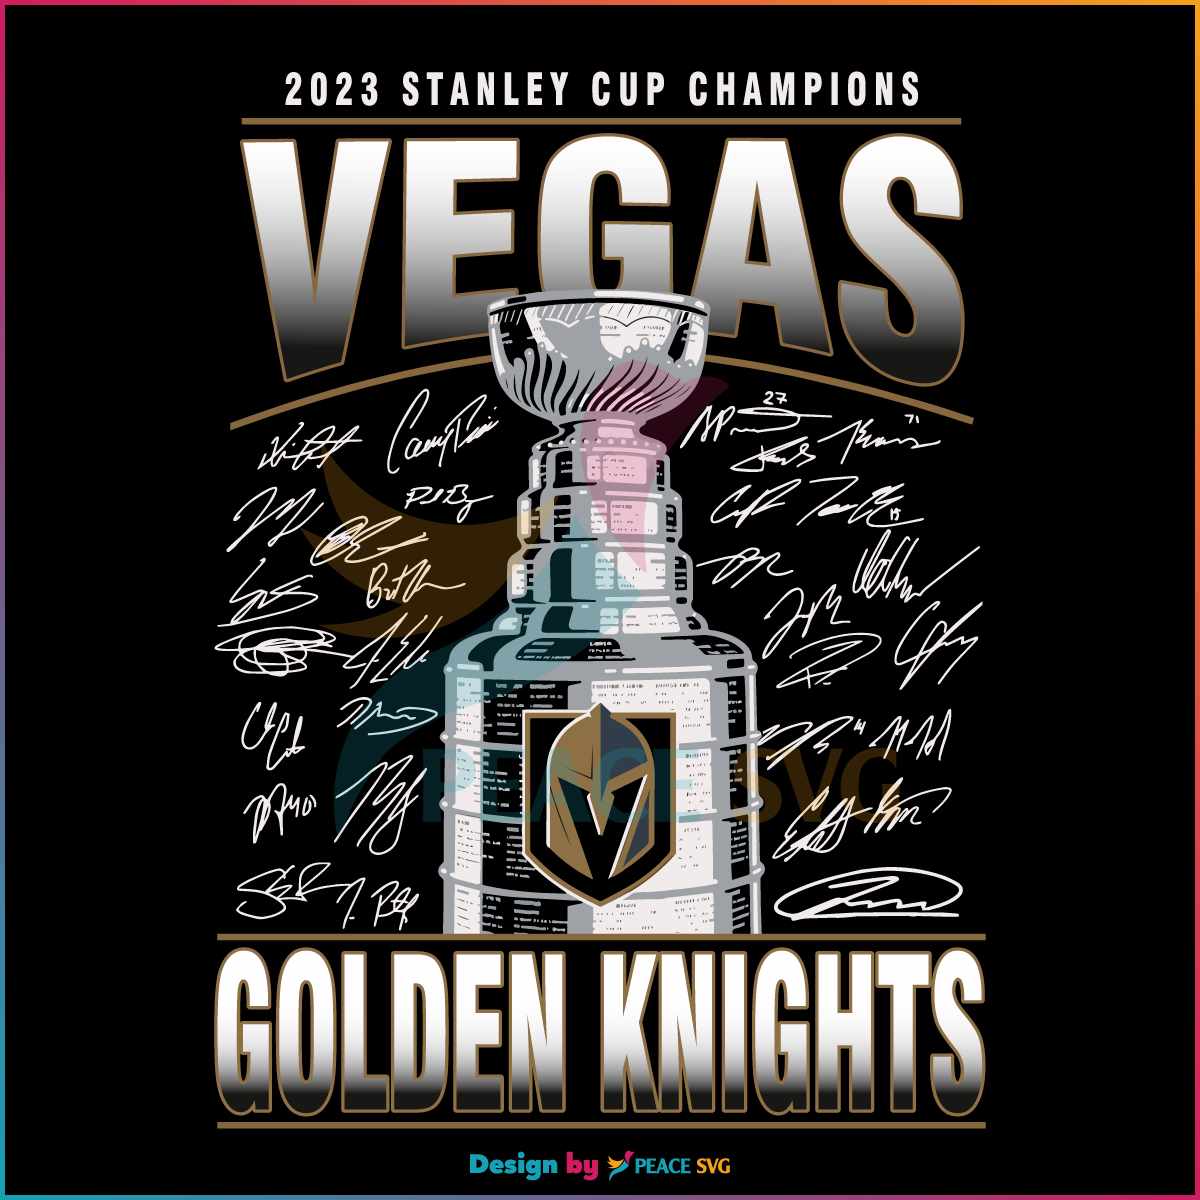 Vegas Golden Knights NHL Champs Signature Roster SVG » PeaceSVG